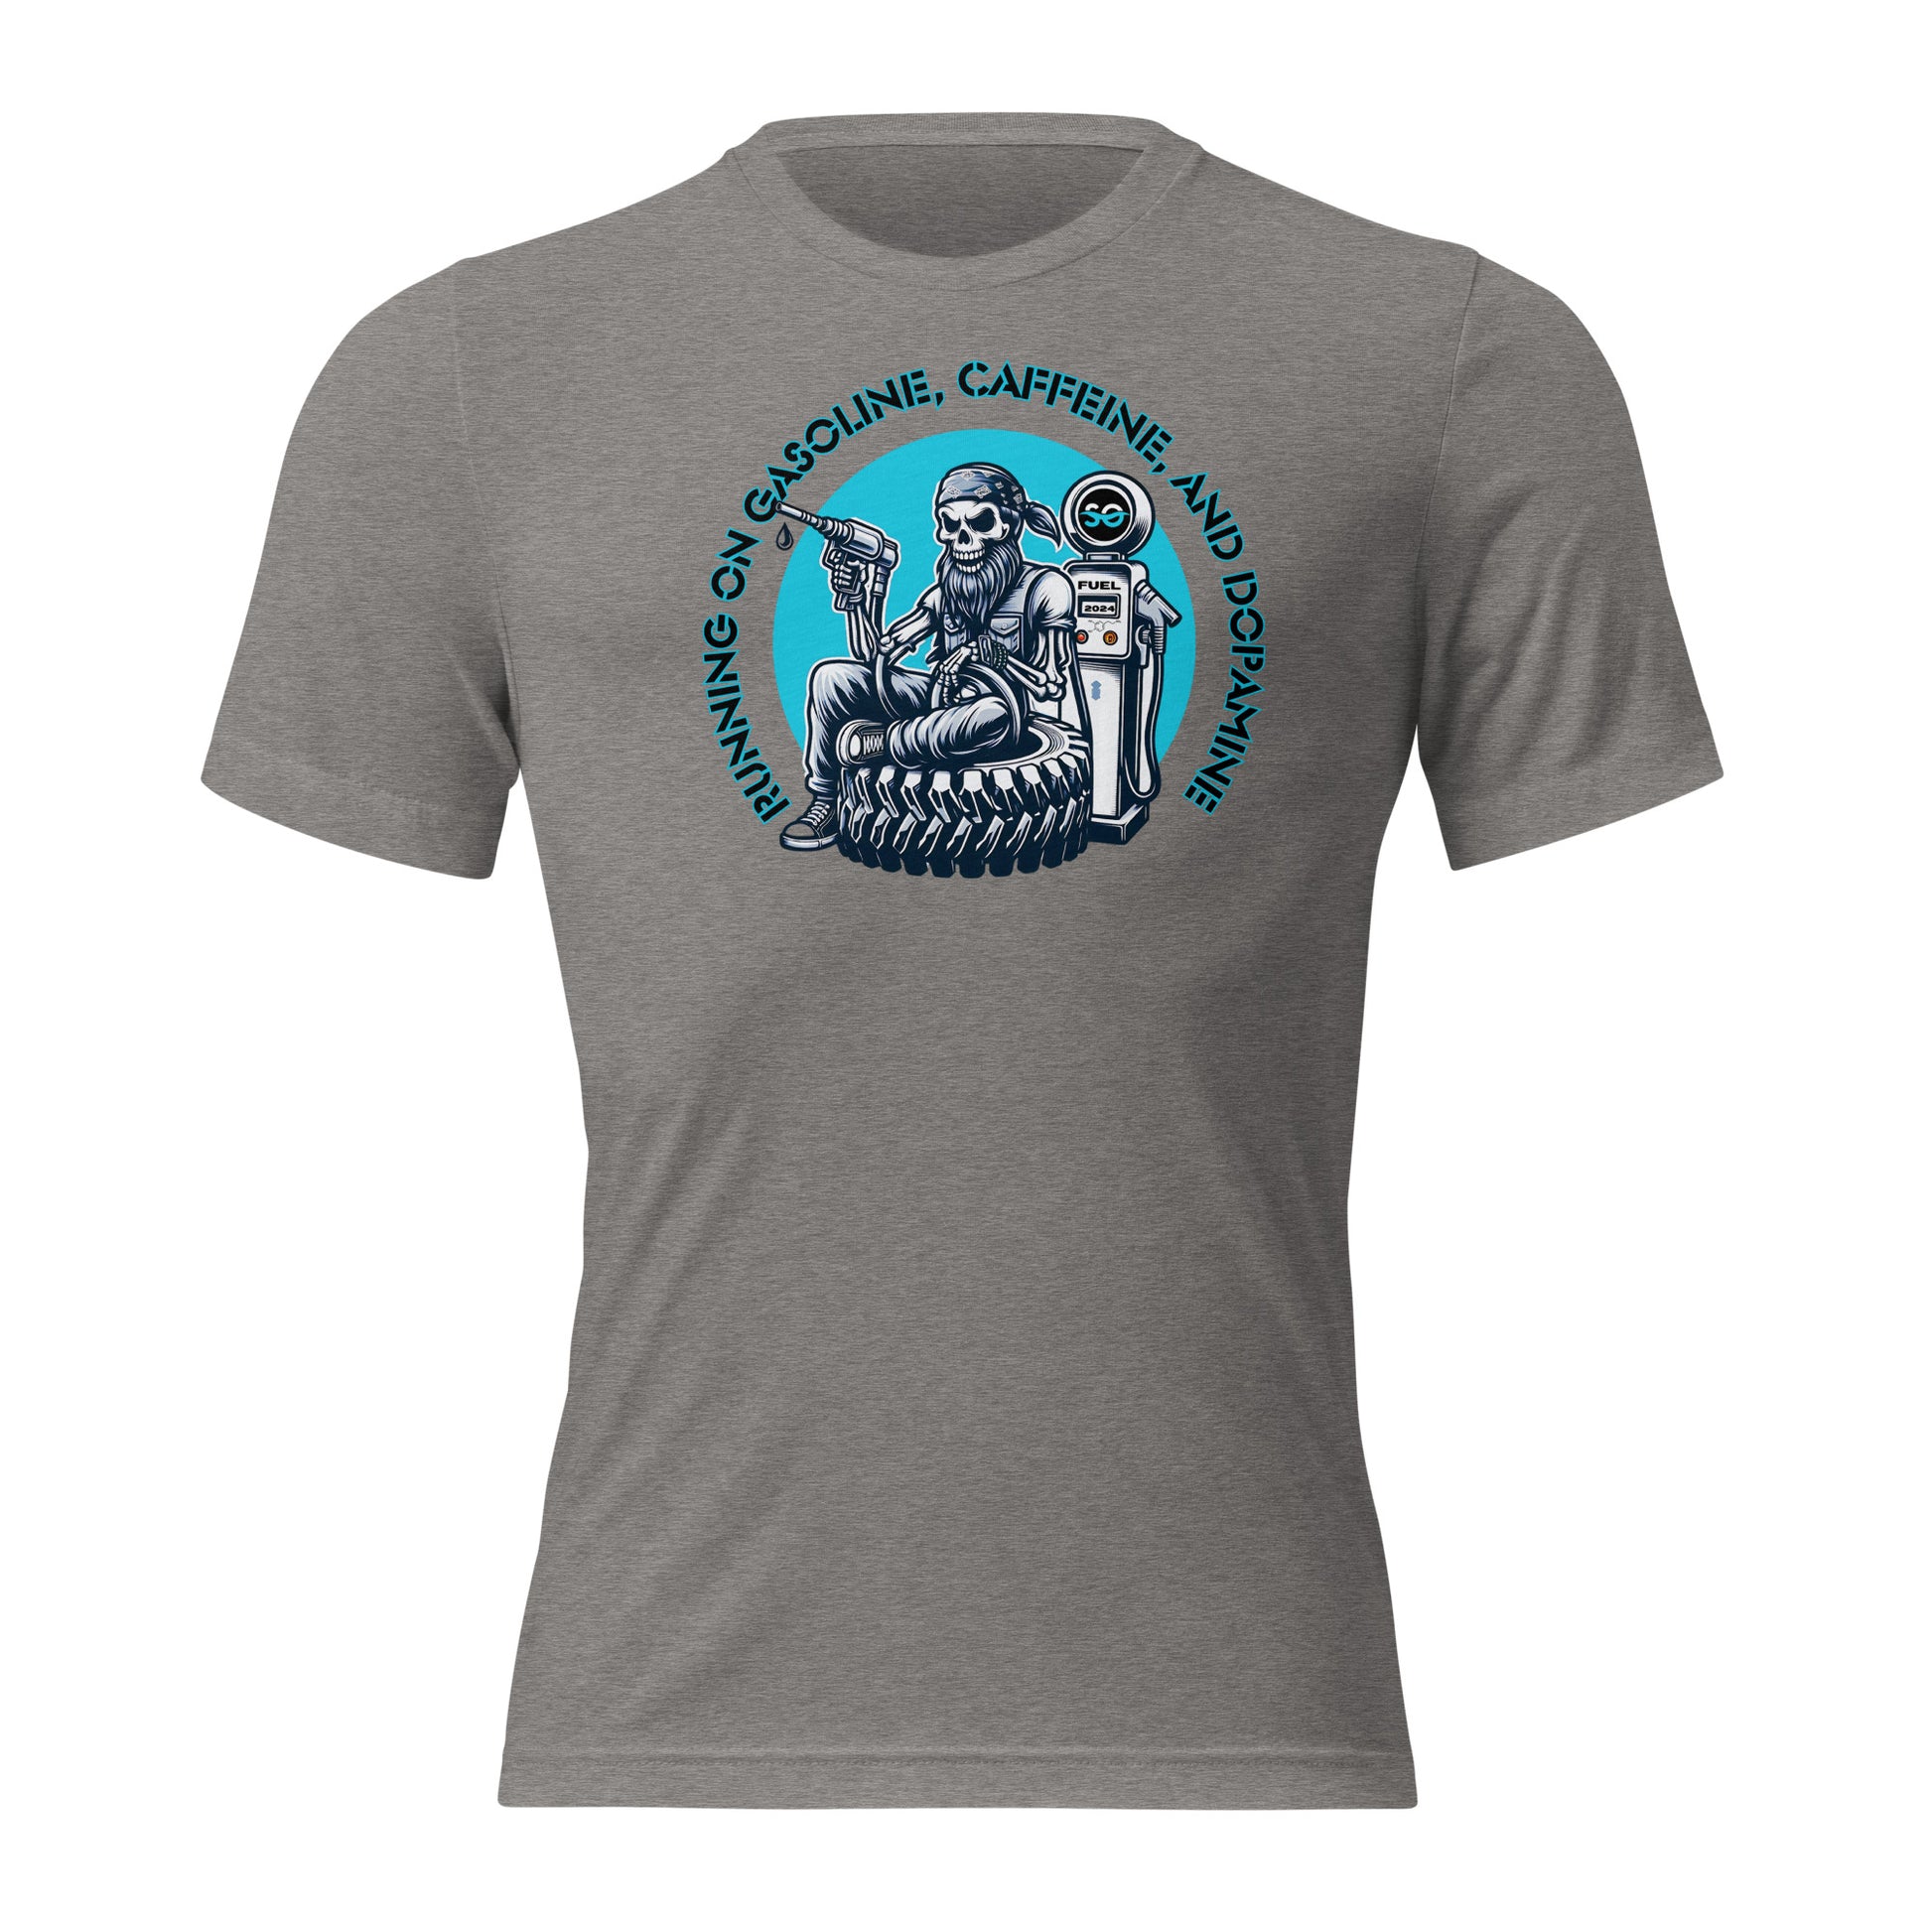 a grey t - shirt with a picture of a man on a motorcycle